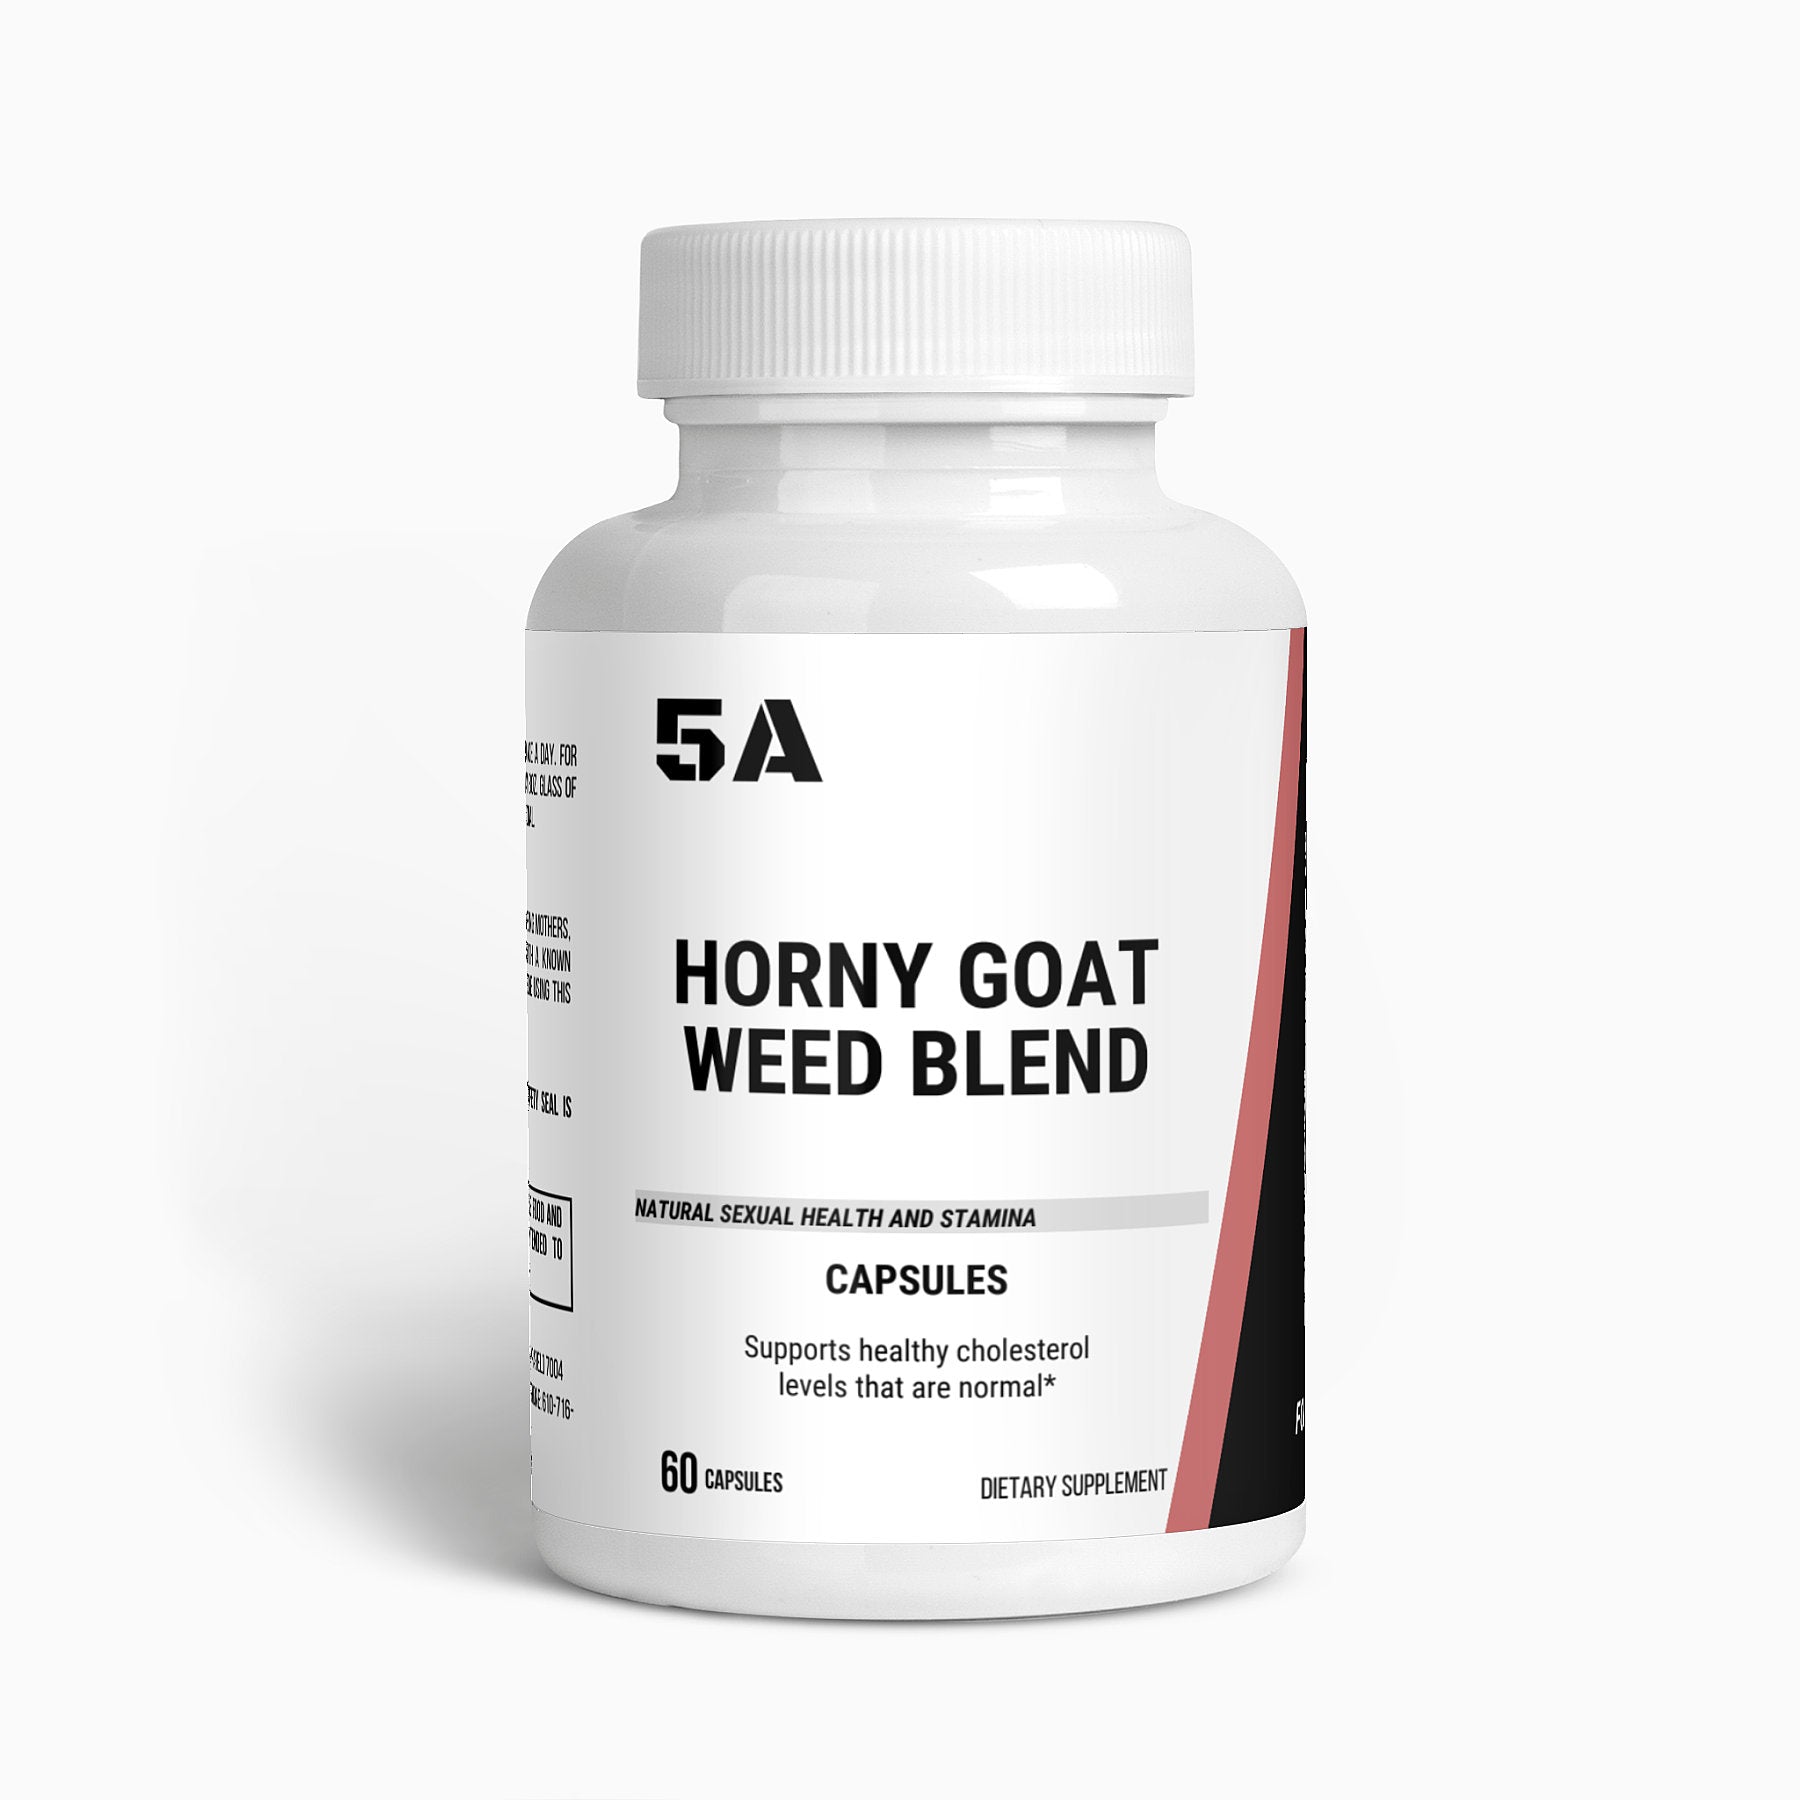 Natural Horny Goat Weed Blend